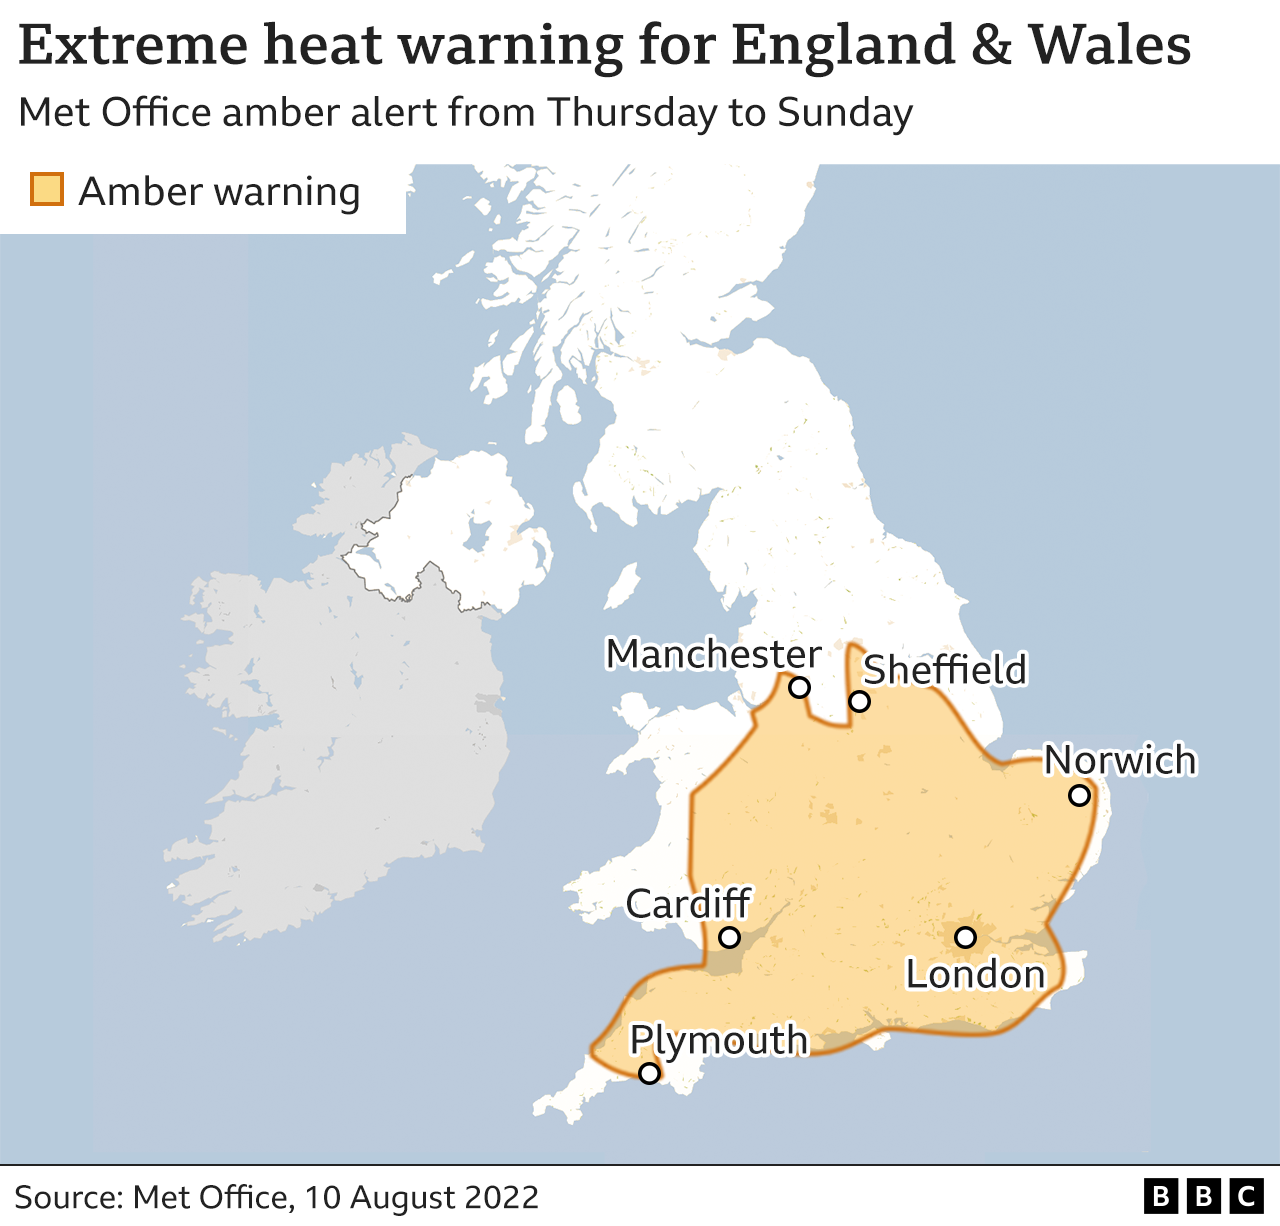 Map showing the areas of England and Wales covered by the amber warning of extreme heat from the Met Office.